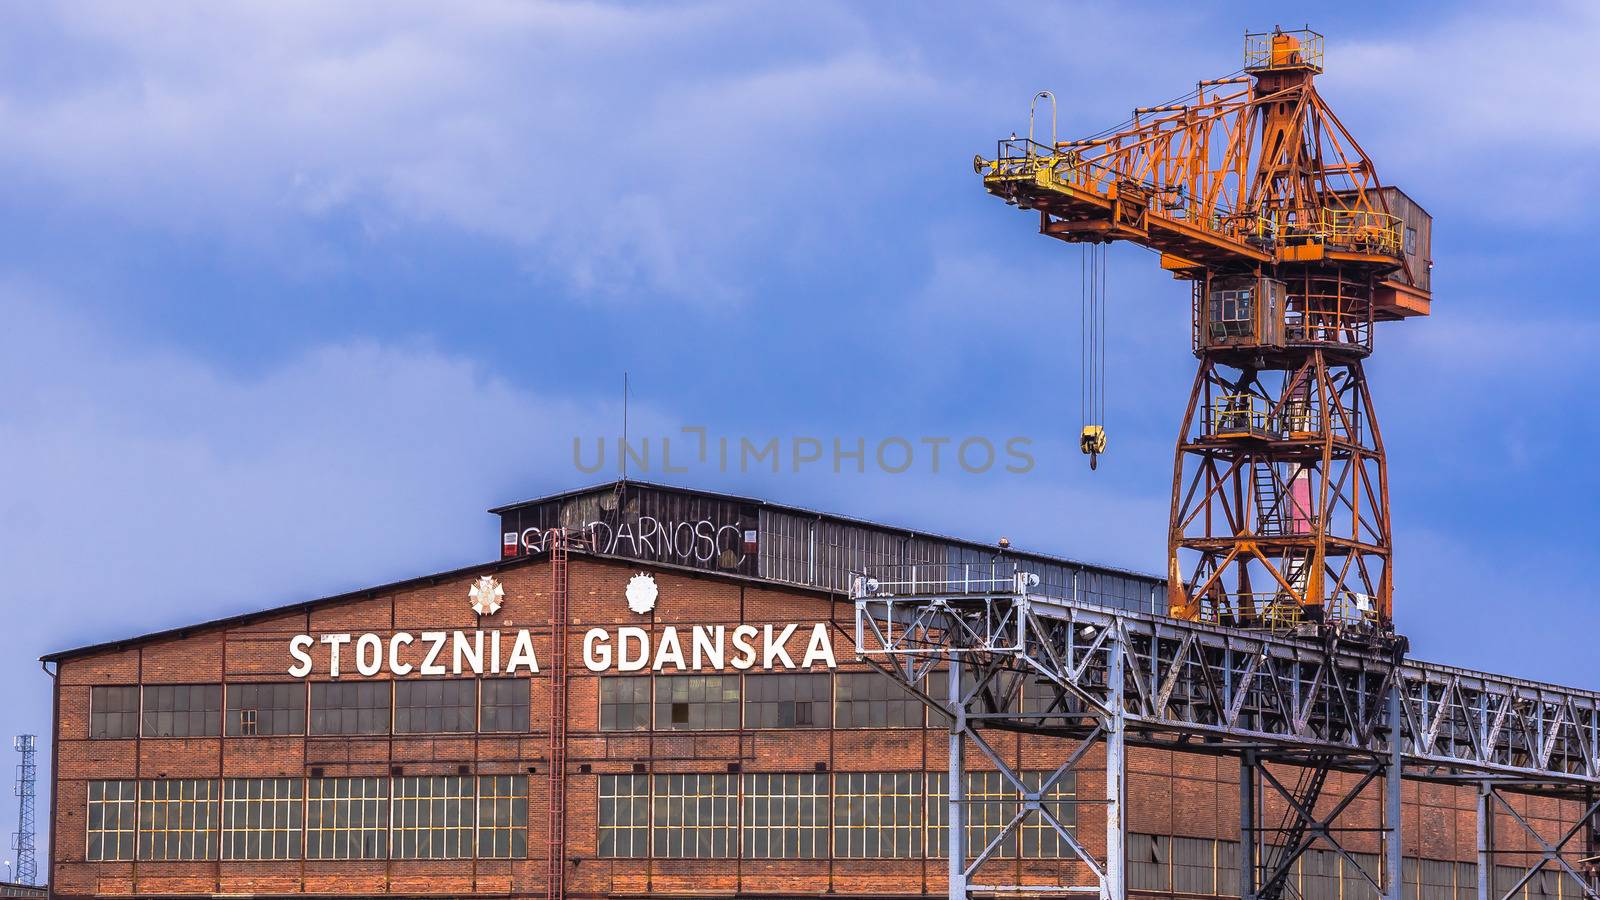 Gdansk Shipyard, so-called "cradle of Solidarity" on July 12, 2012 in Gdansk. Historical place of Polish workers strike in August 1980, under the leadership of Lech Walesa.